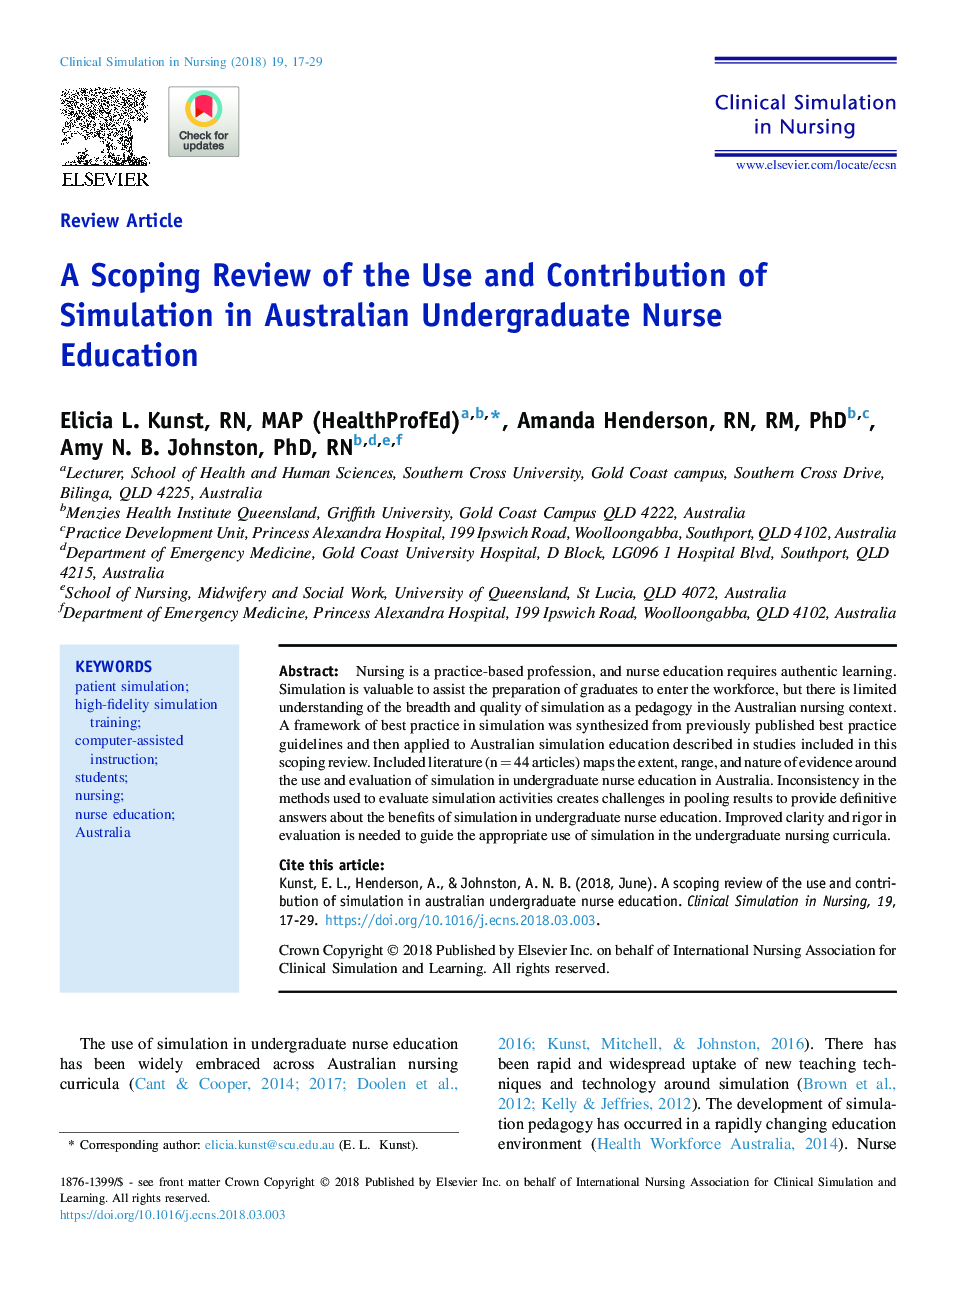 A Scoping Review of the Use and Contribution of Simulation in Australian Undergraduate Nurse Education